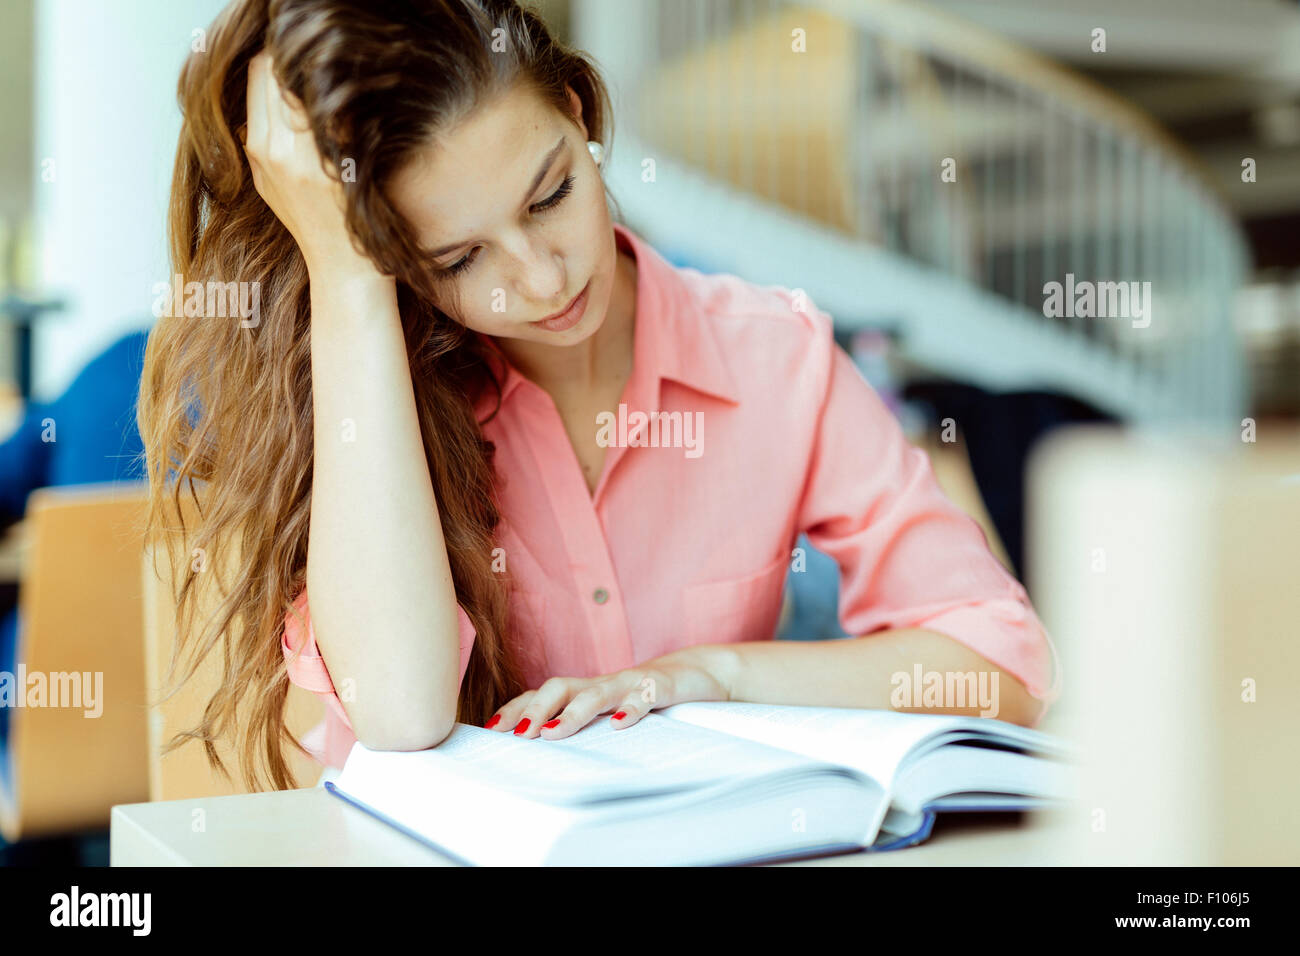 Beautiful focused woman studying in library Stock Photo